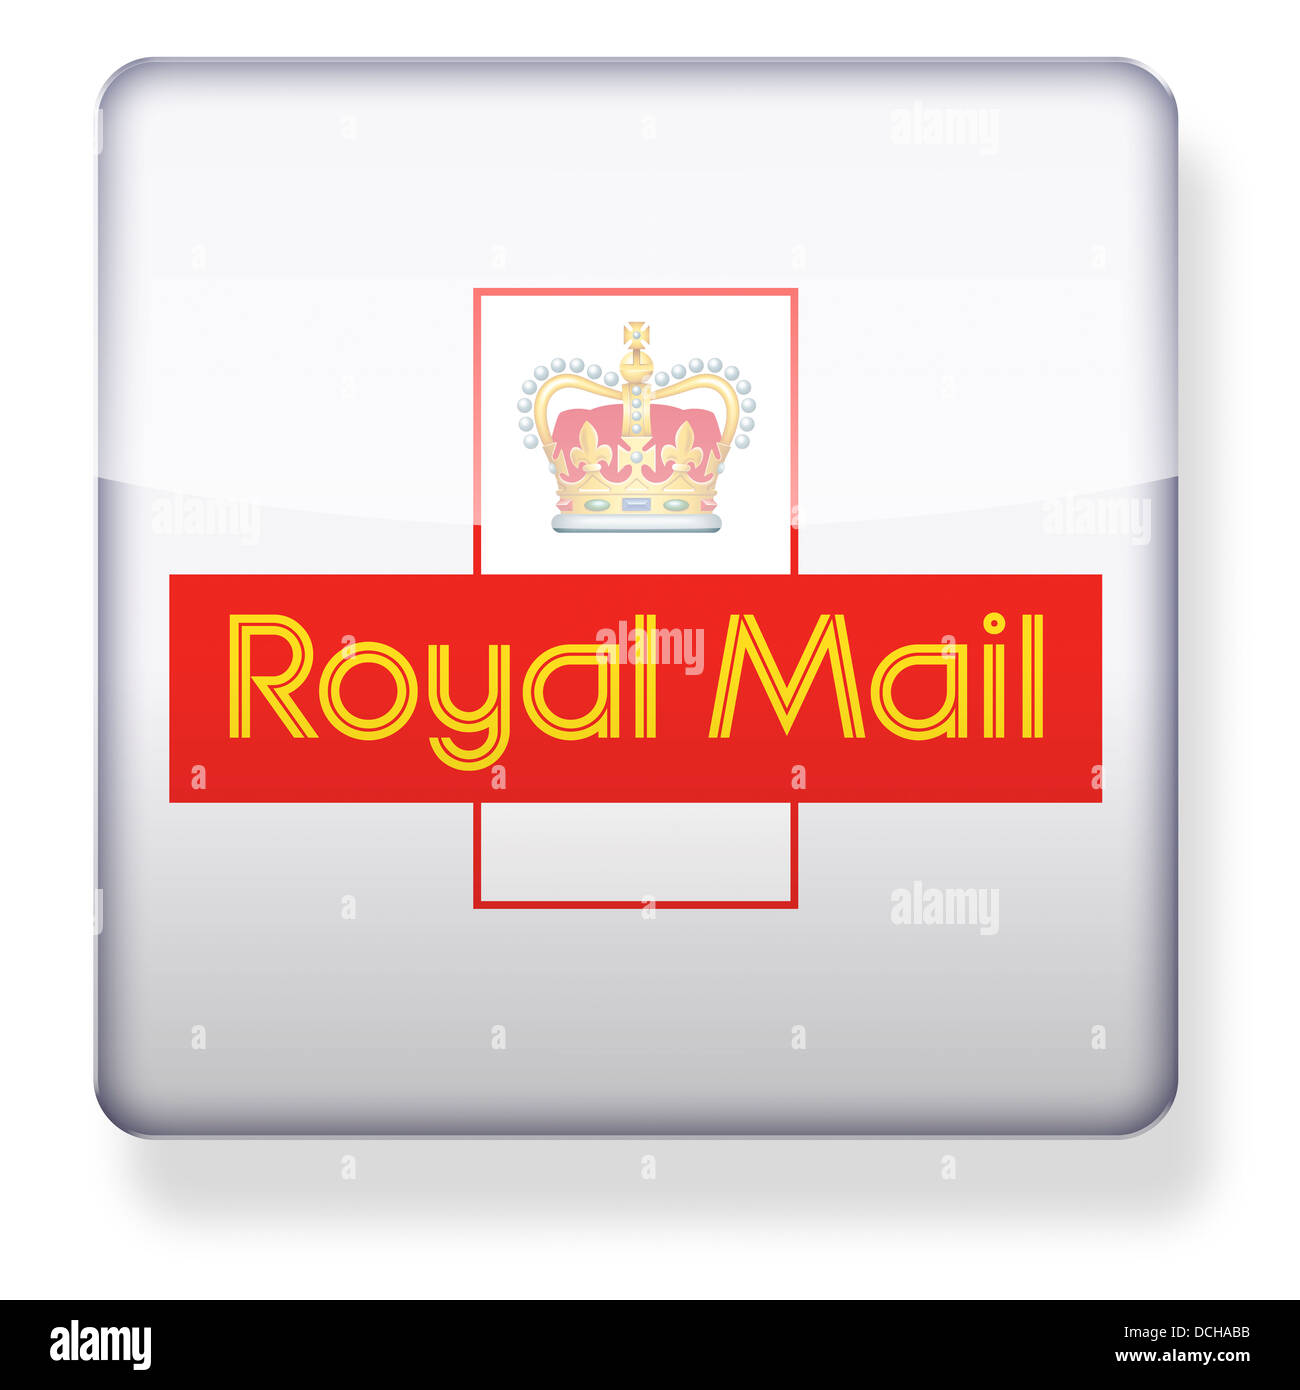 Royal Mail logo as an app icon. Clipping path included. Stock Photo